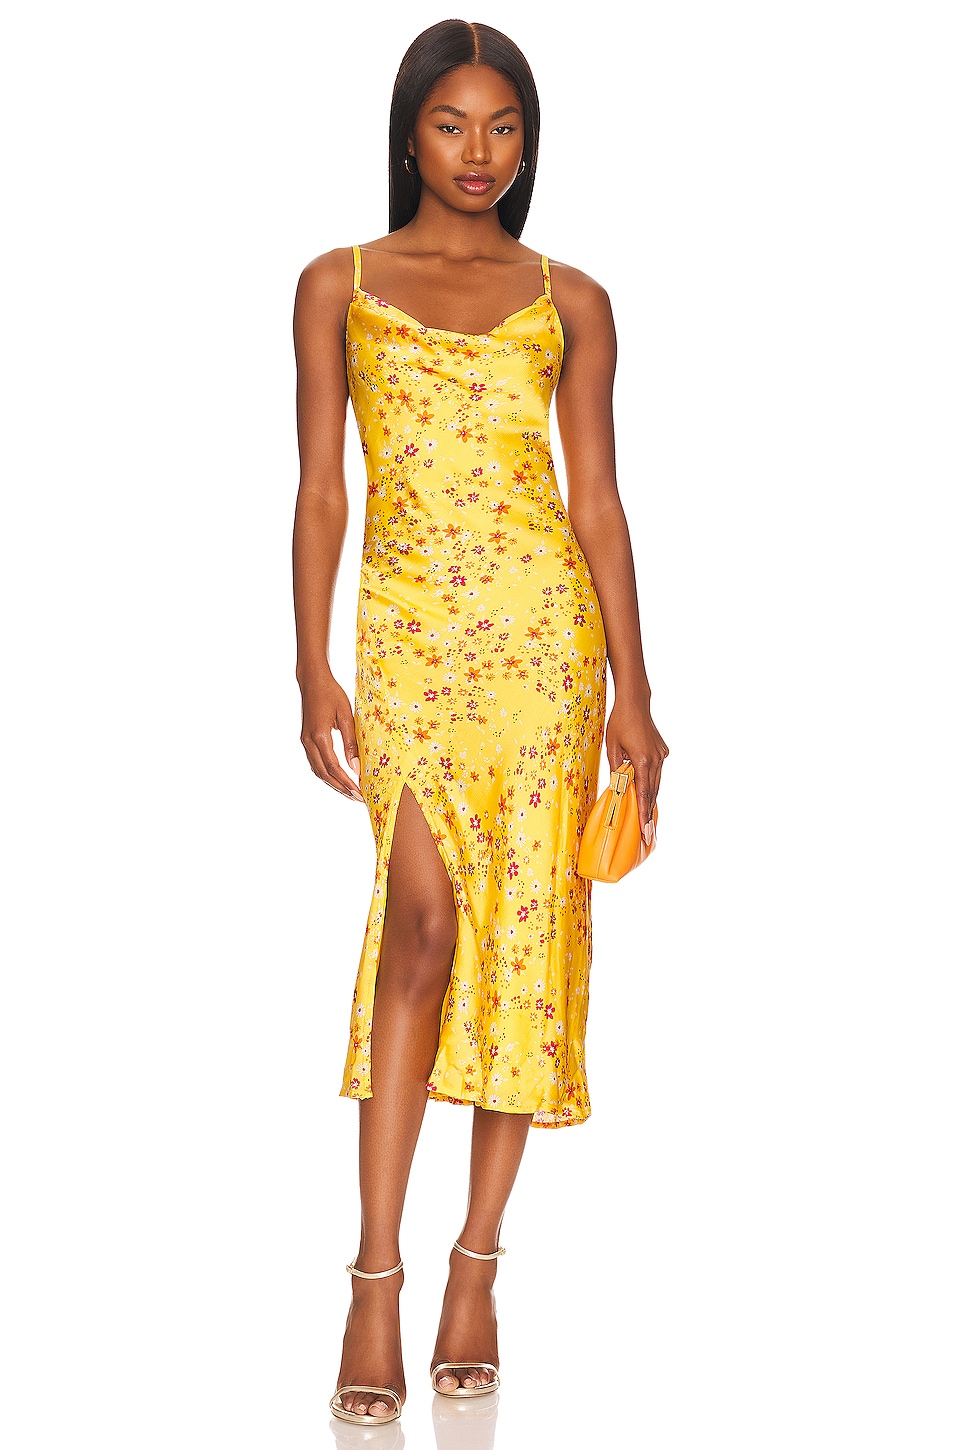 Blair - Yellow Floral Skater Dress With Drawstring Sleeves – Inchperfect